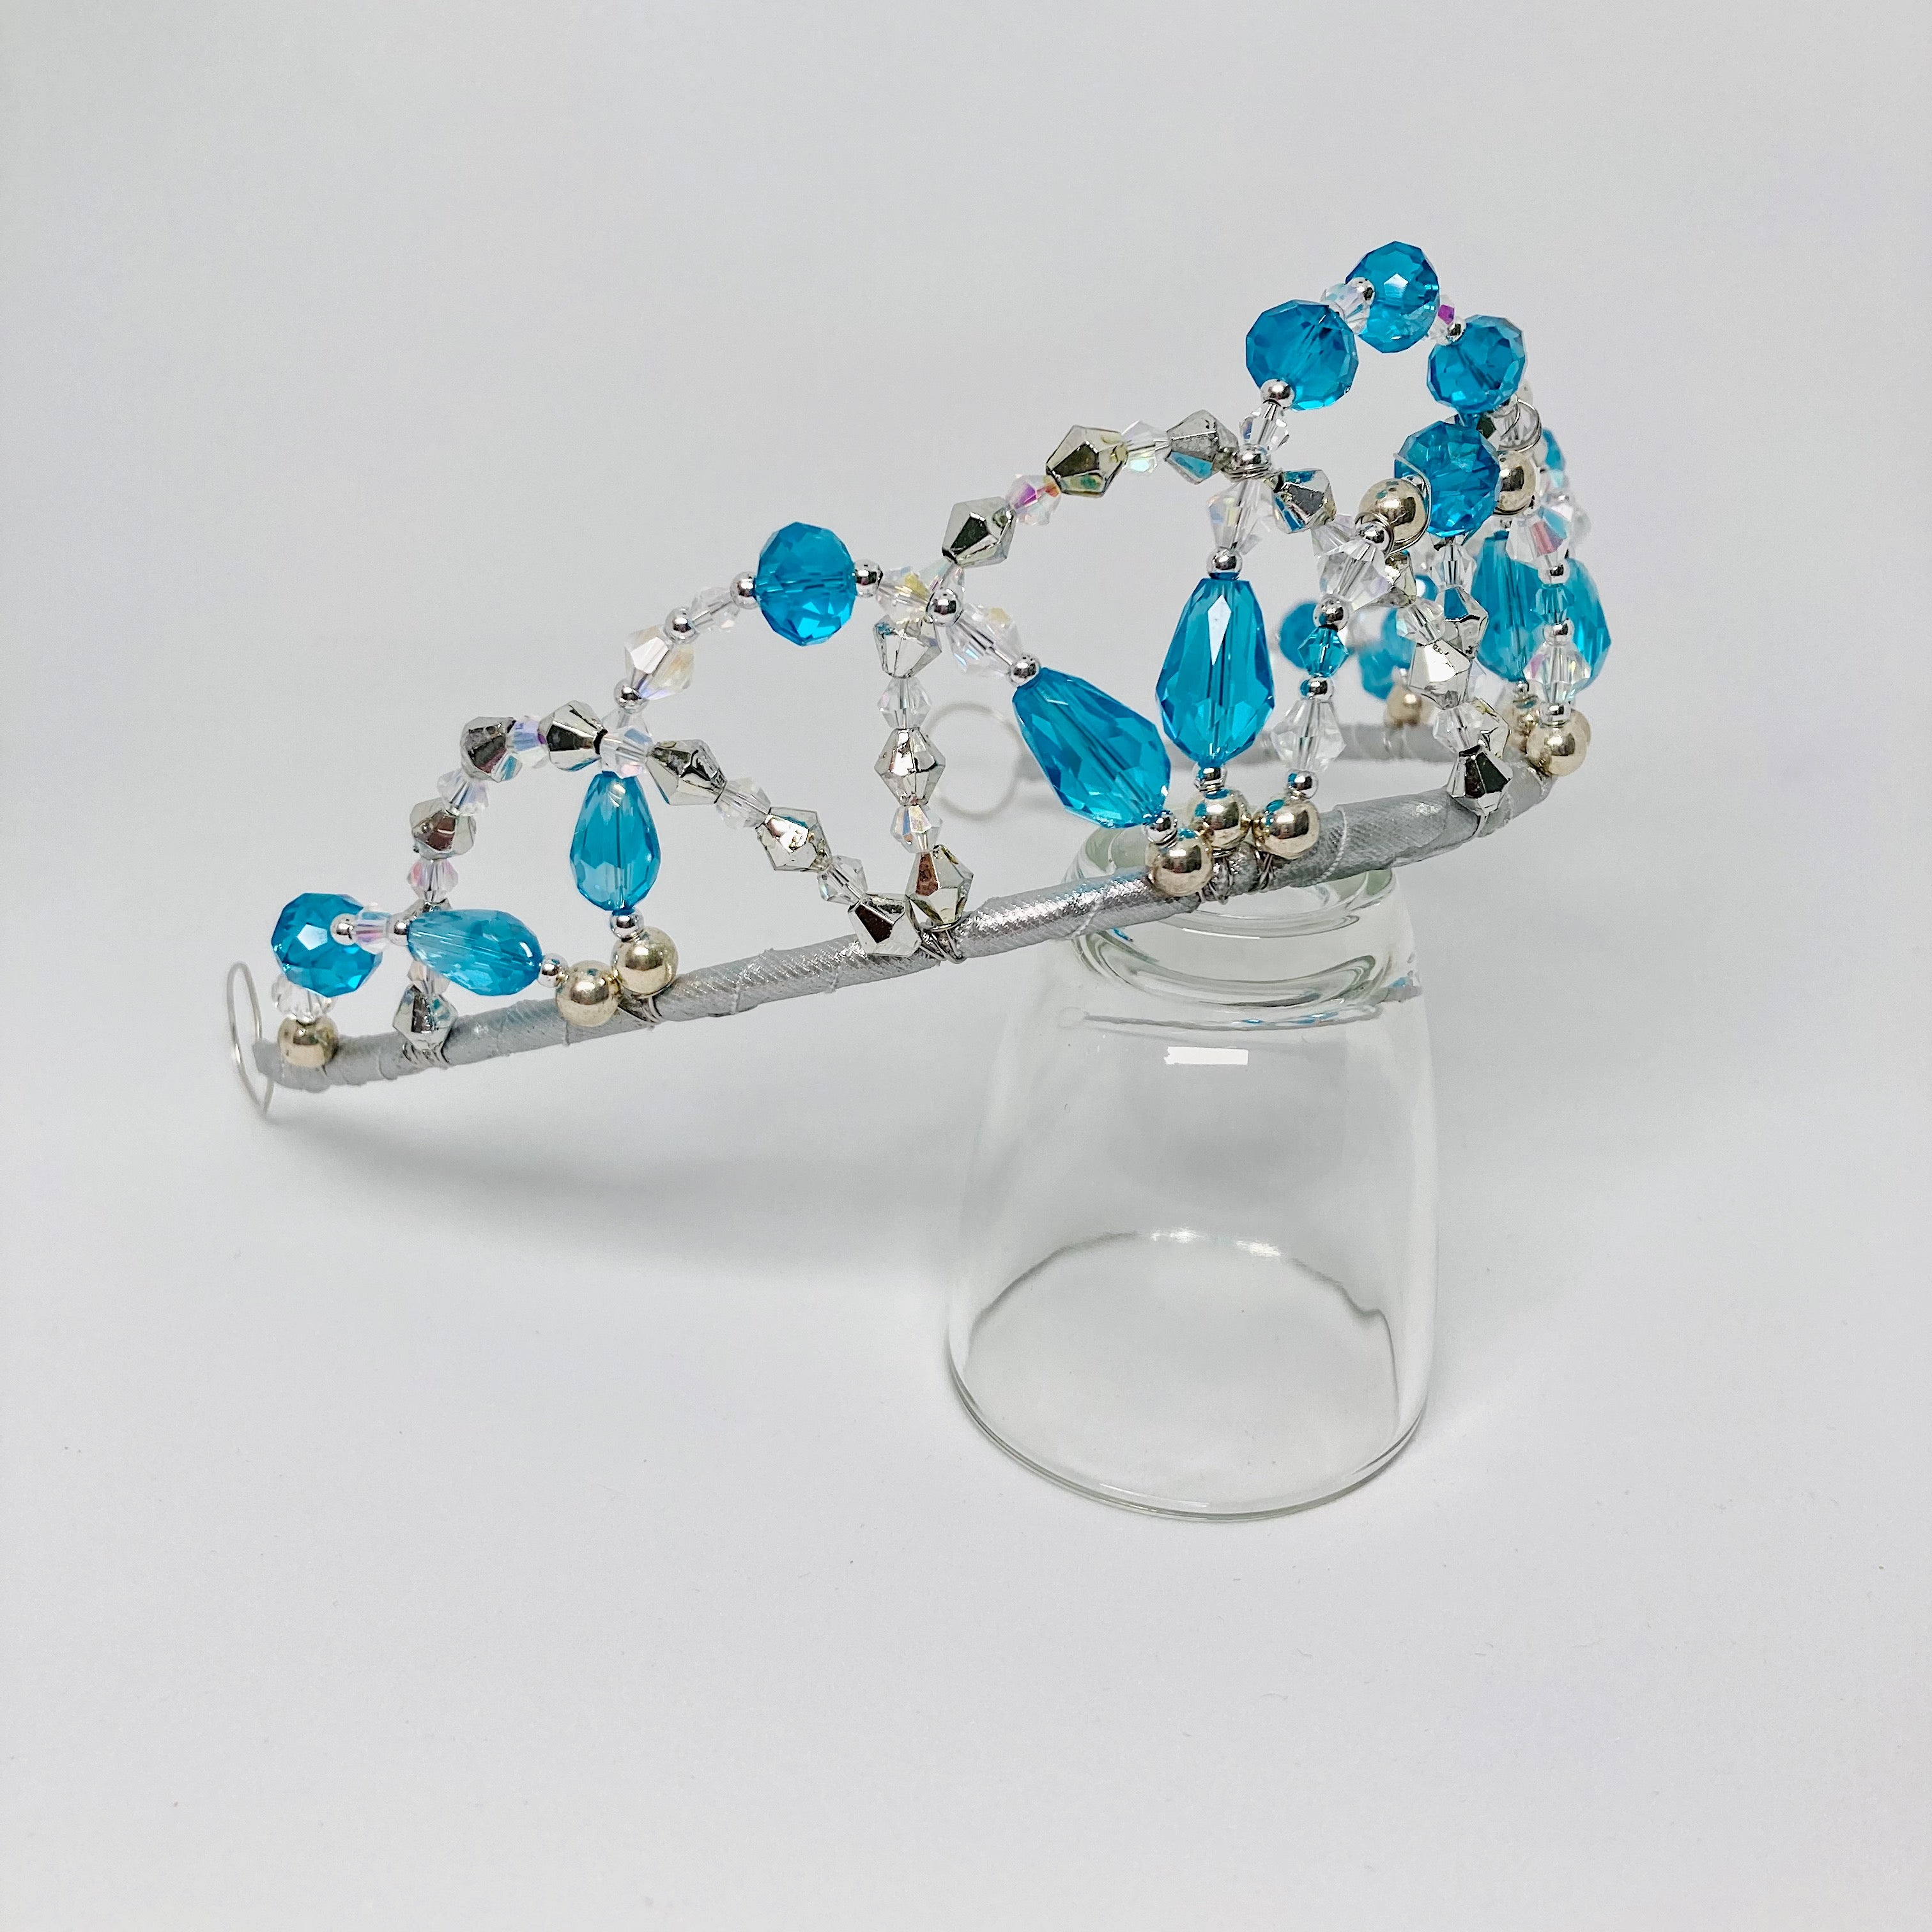 Side view of tiara featuring aqua blue and clear crystals and silver bicone and round beads.  Tiara is displayed on a clear glass.